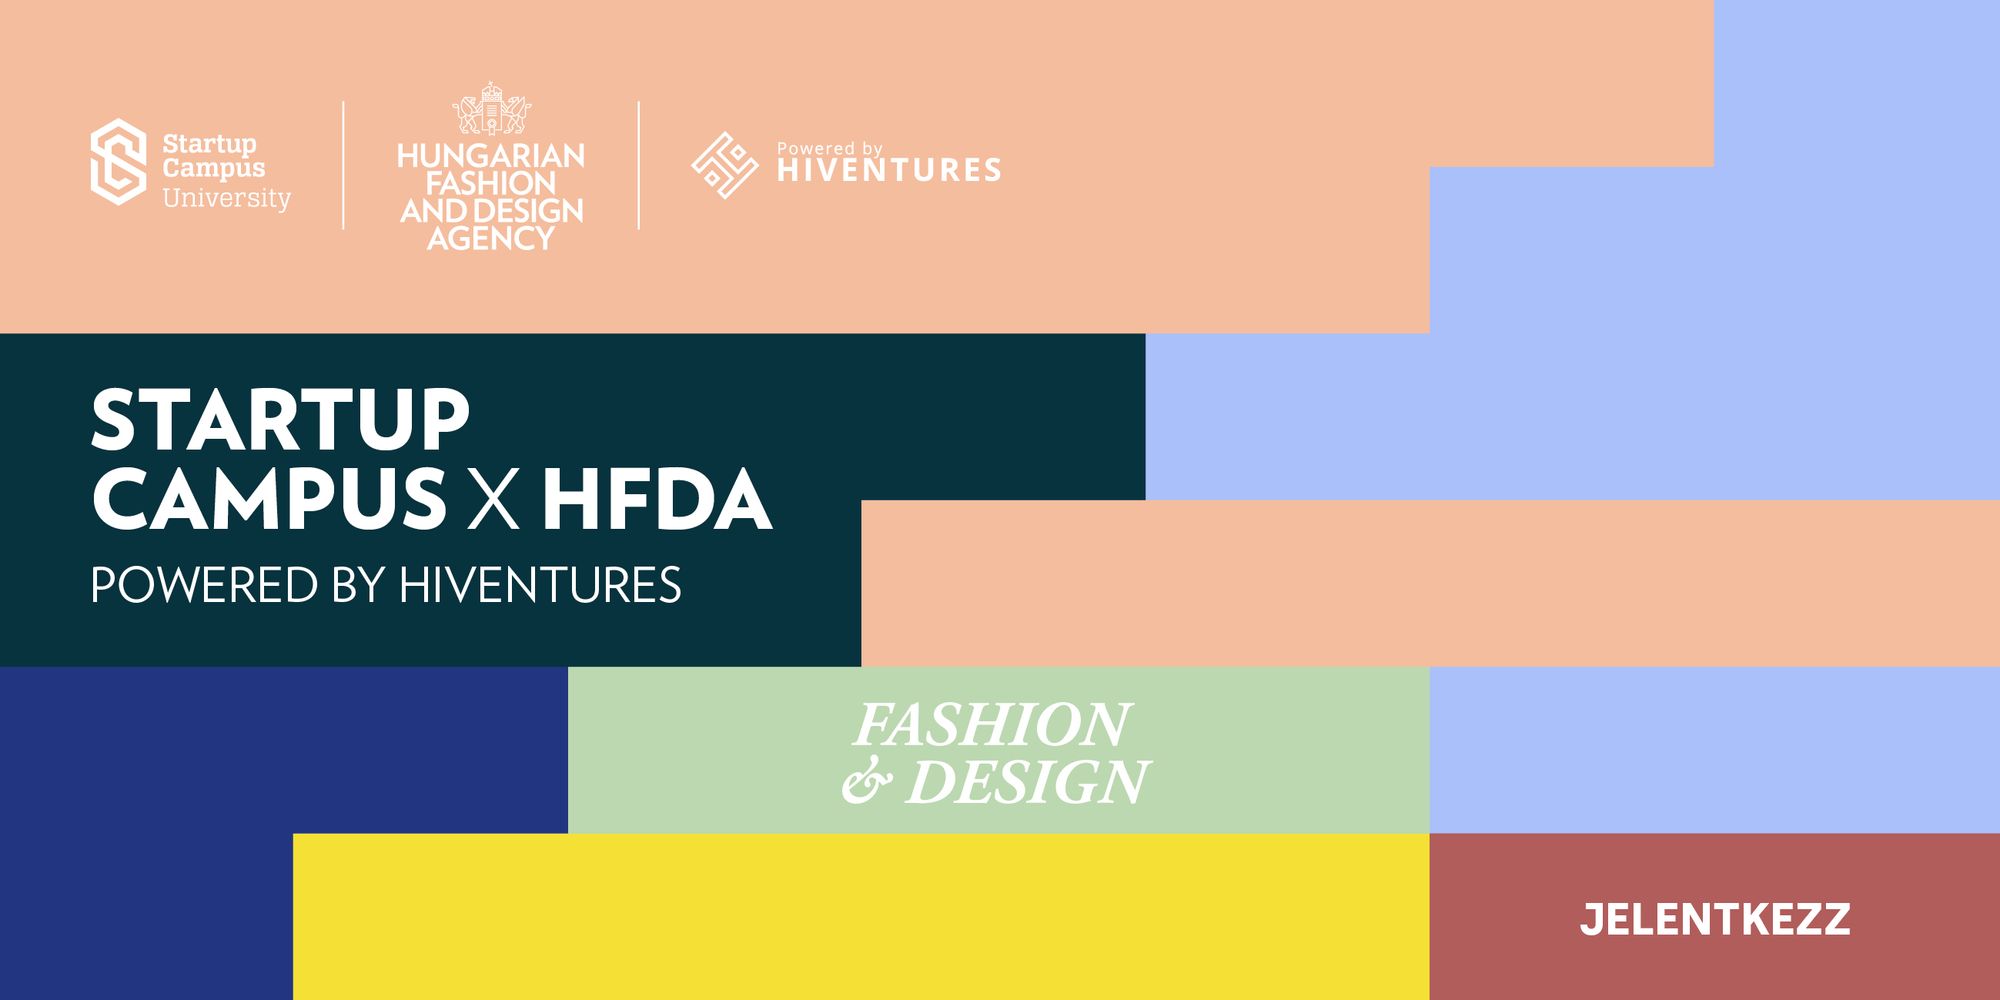 Startup Campus x HFDA powered by Hiventures